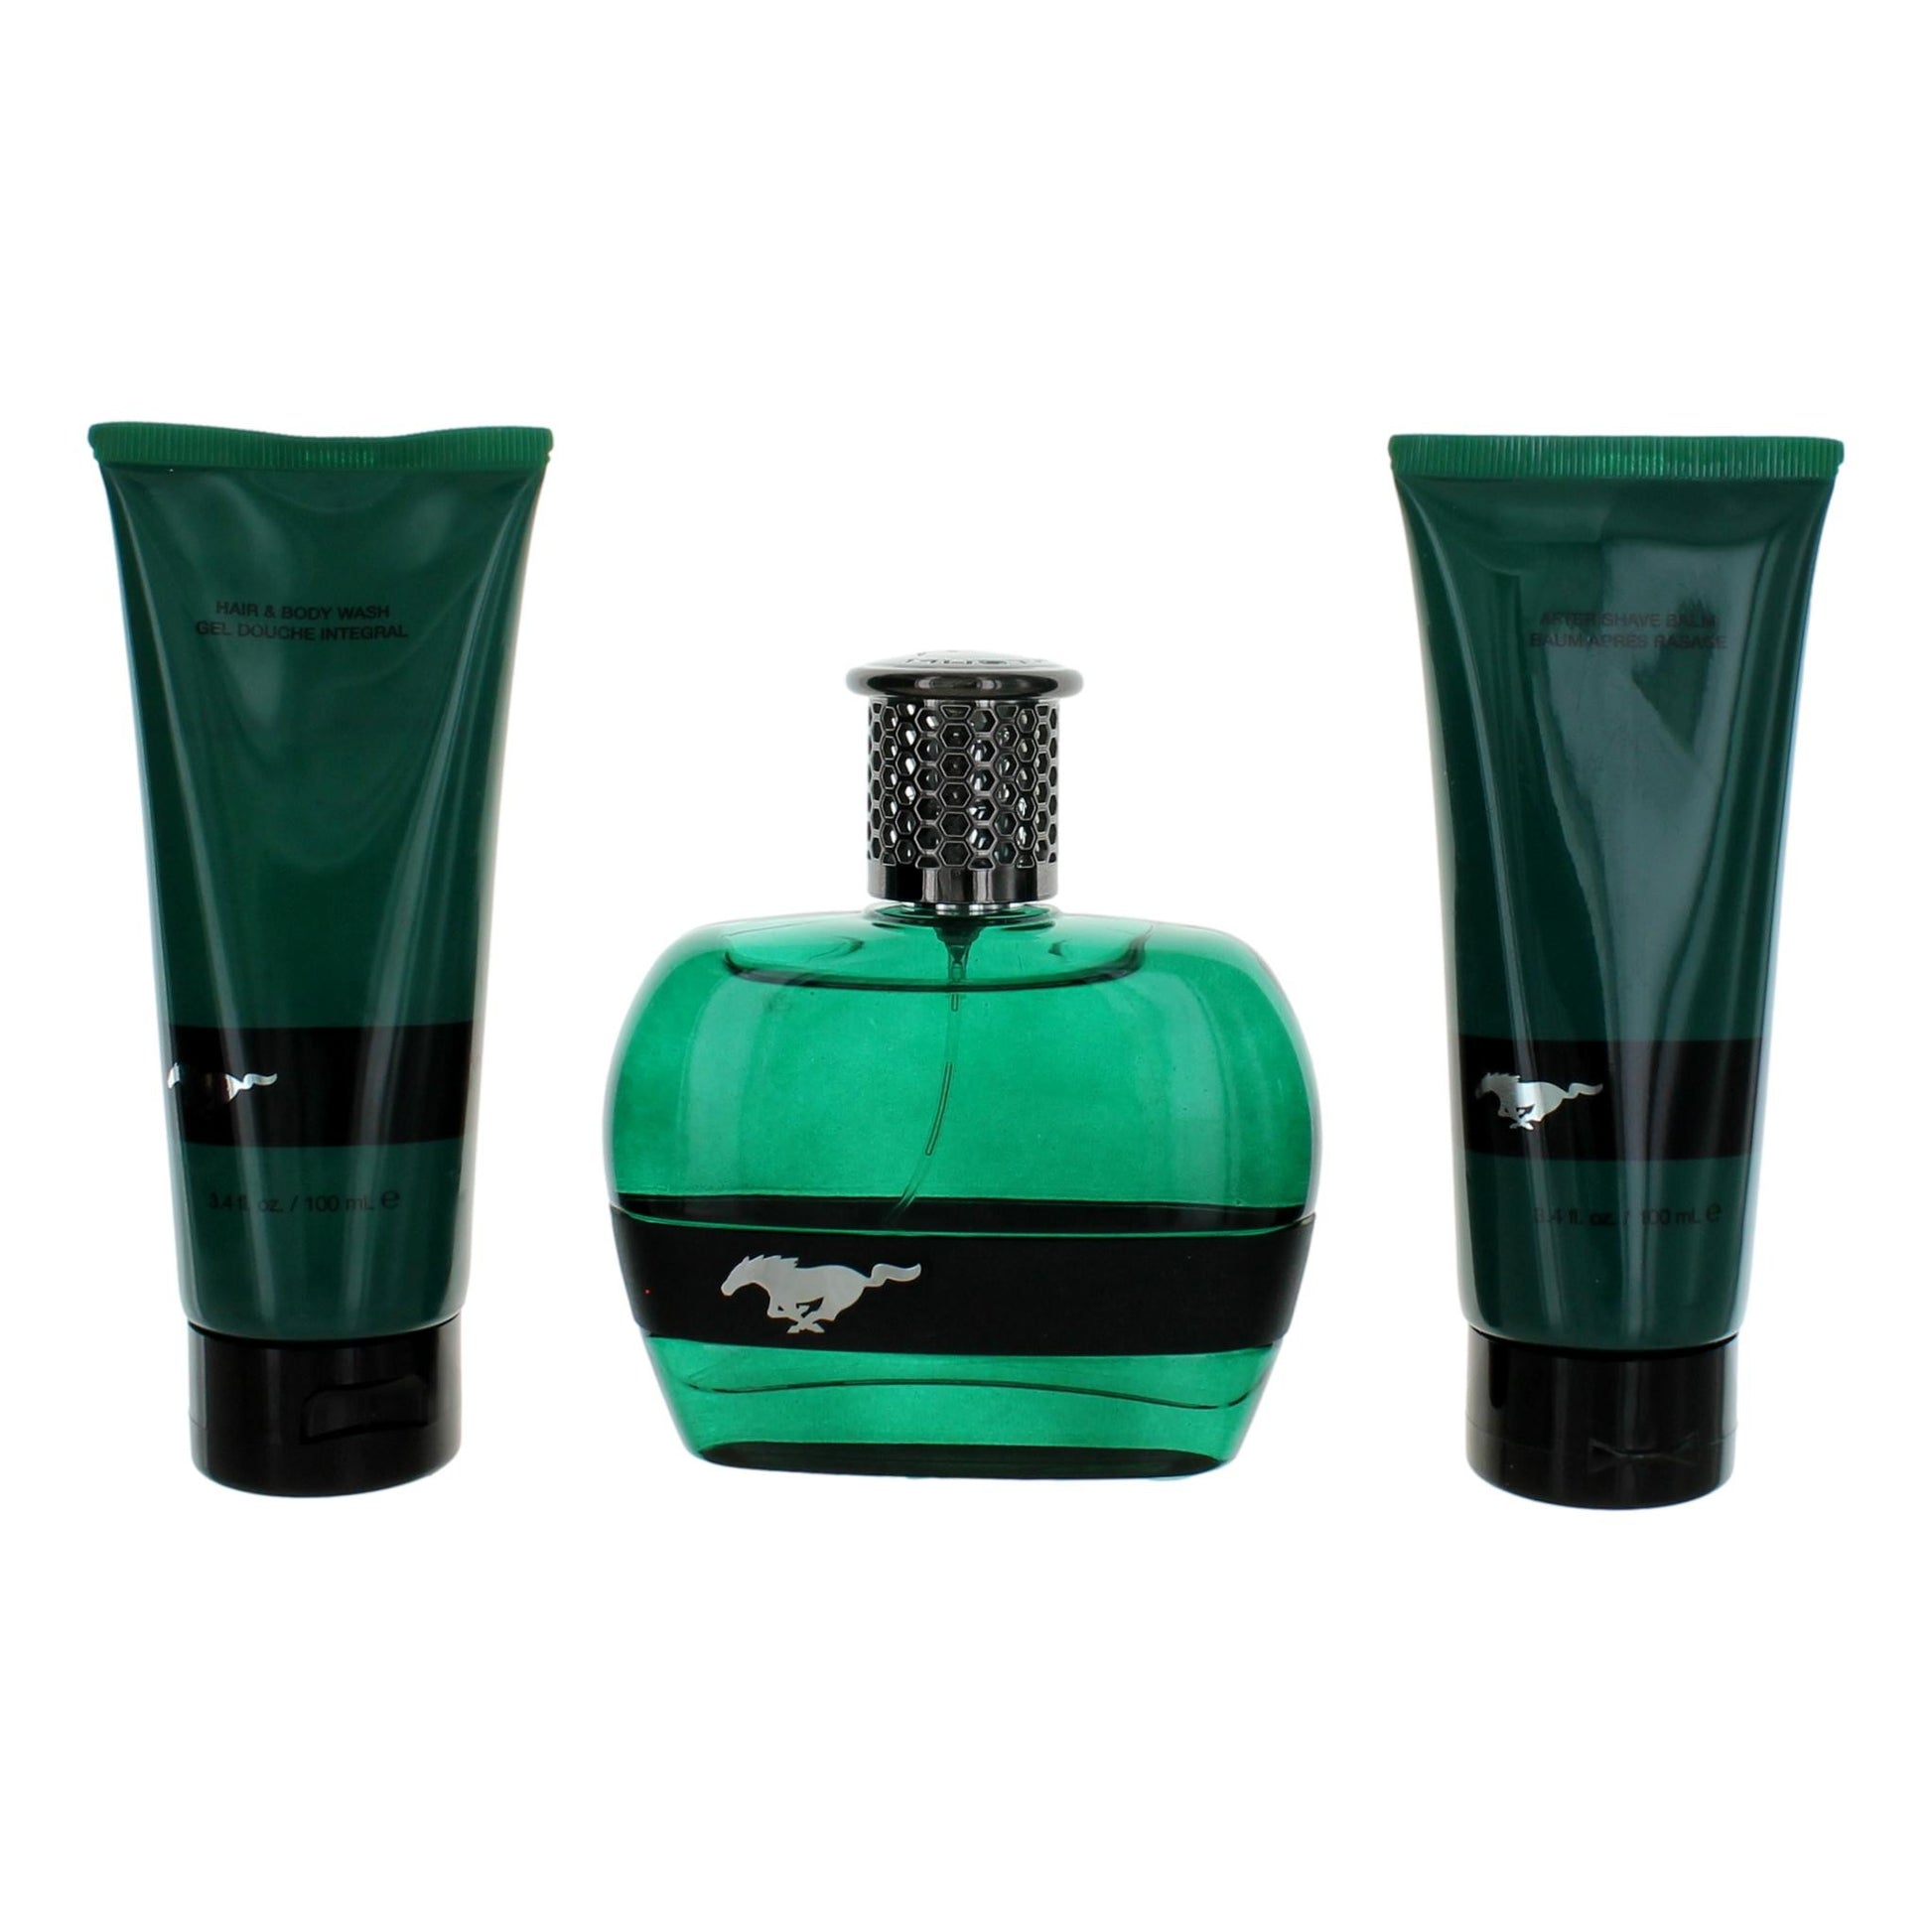 Bottle of Mustang Green by Mustang, 3 Piece Gift Set for Men